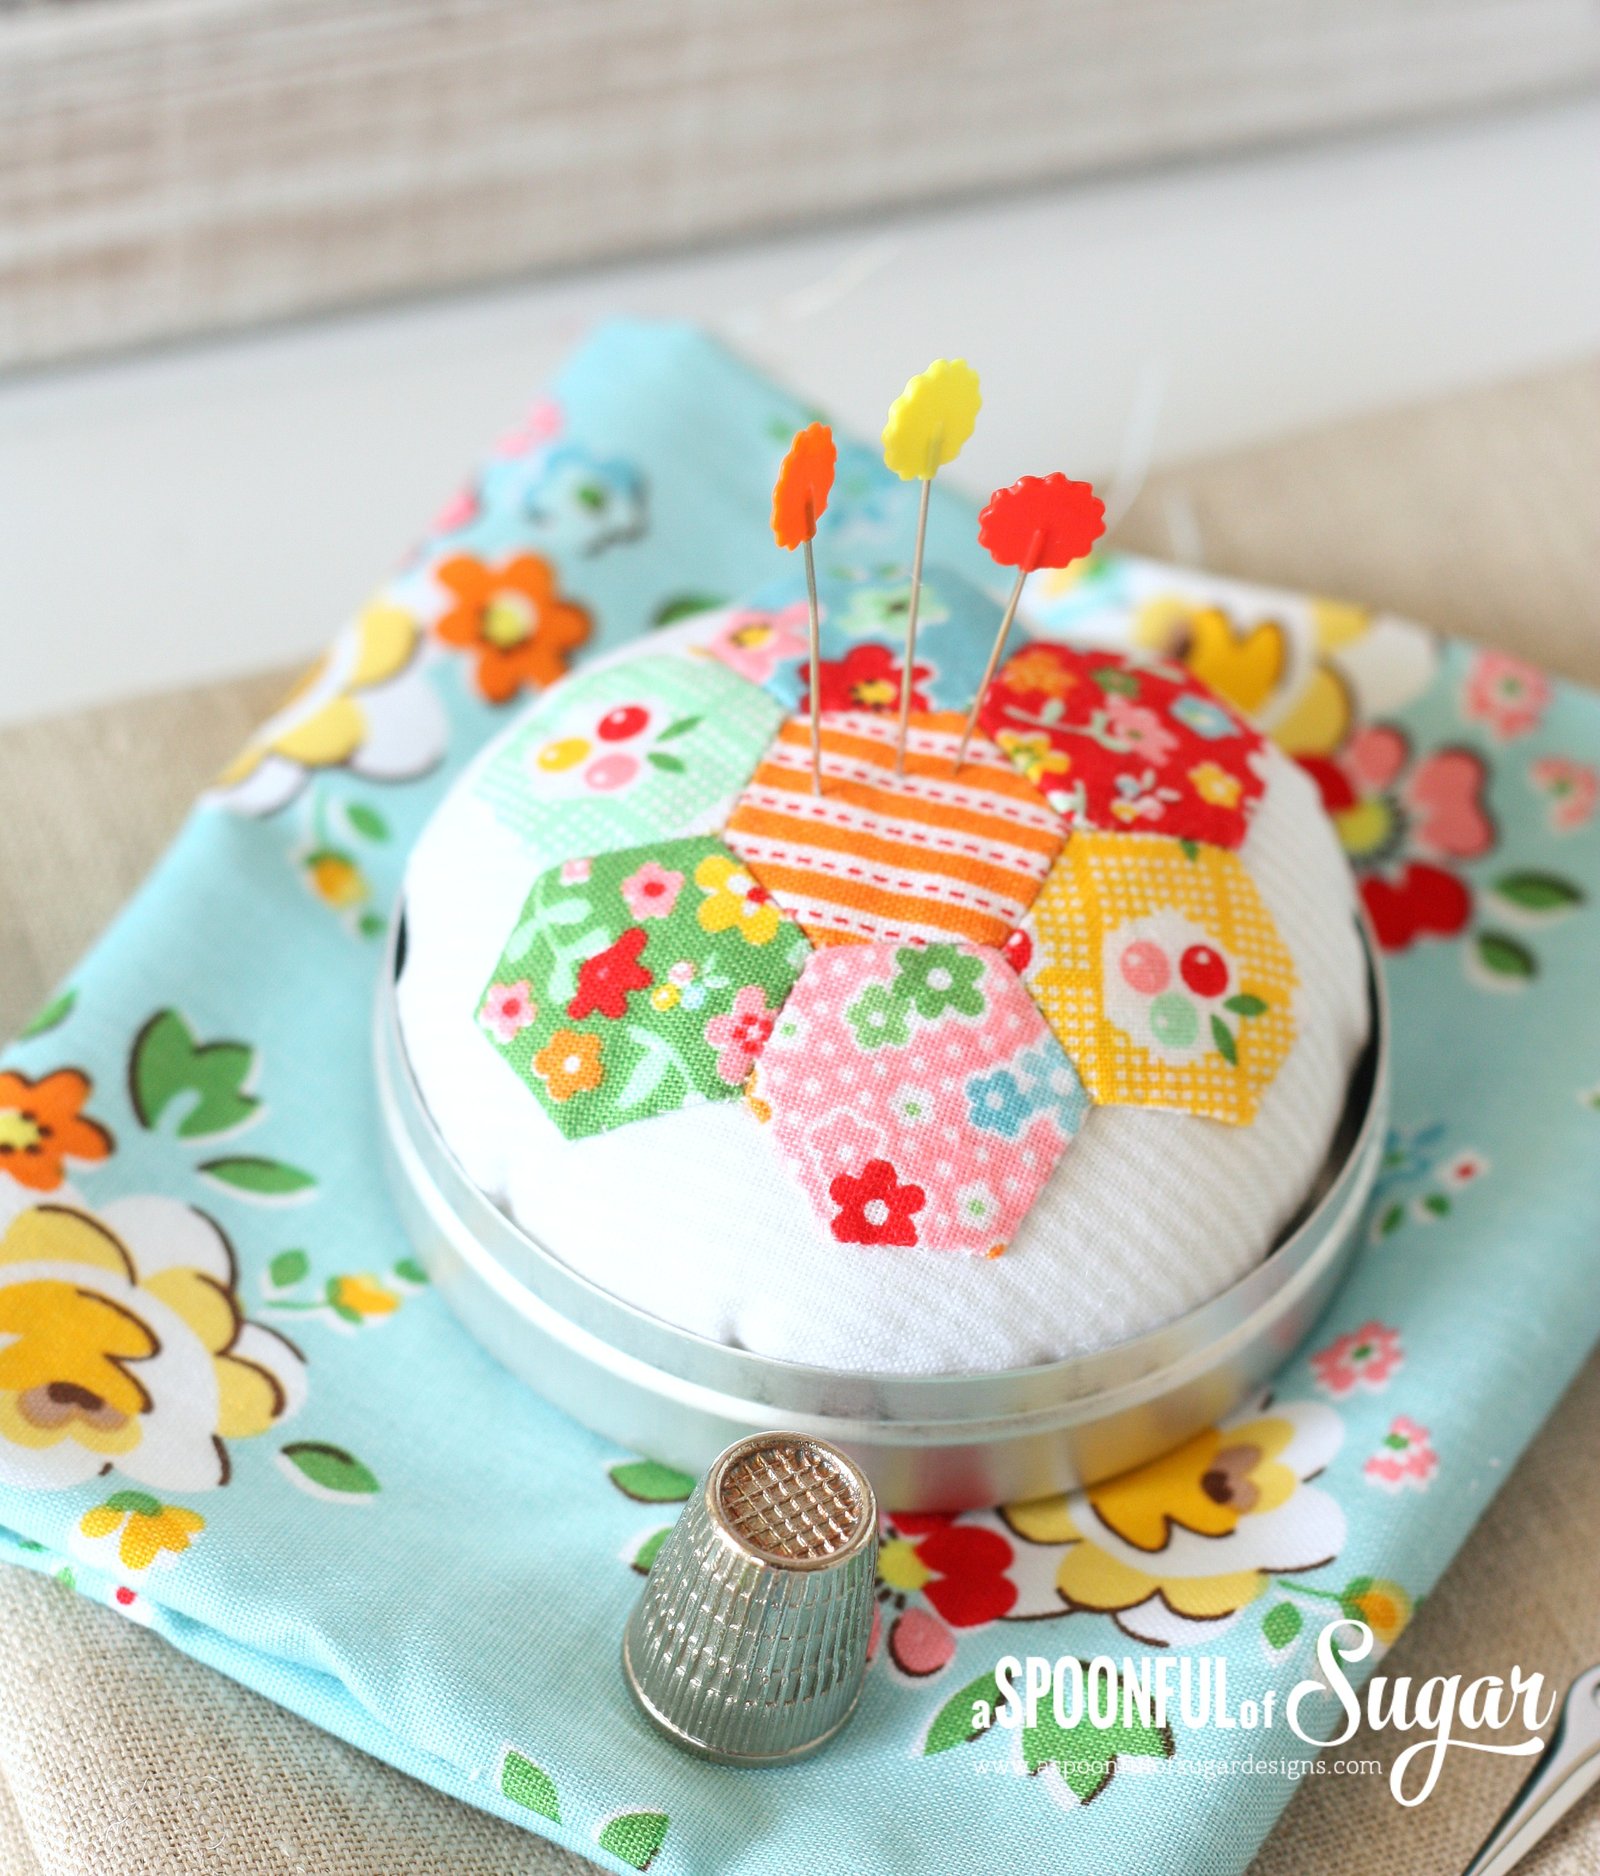 Hexie Pincushion Sewing Tutorial by A Spoonful of Sugar